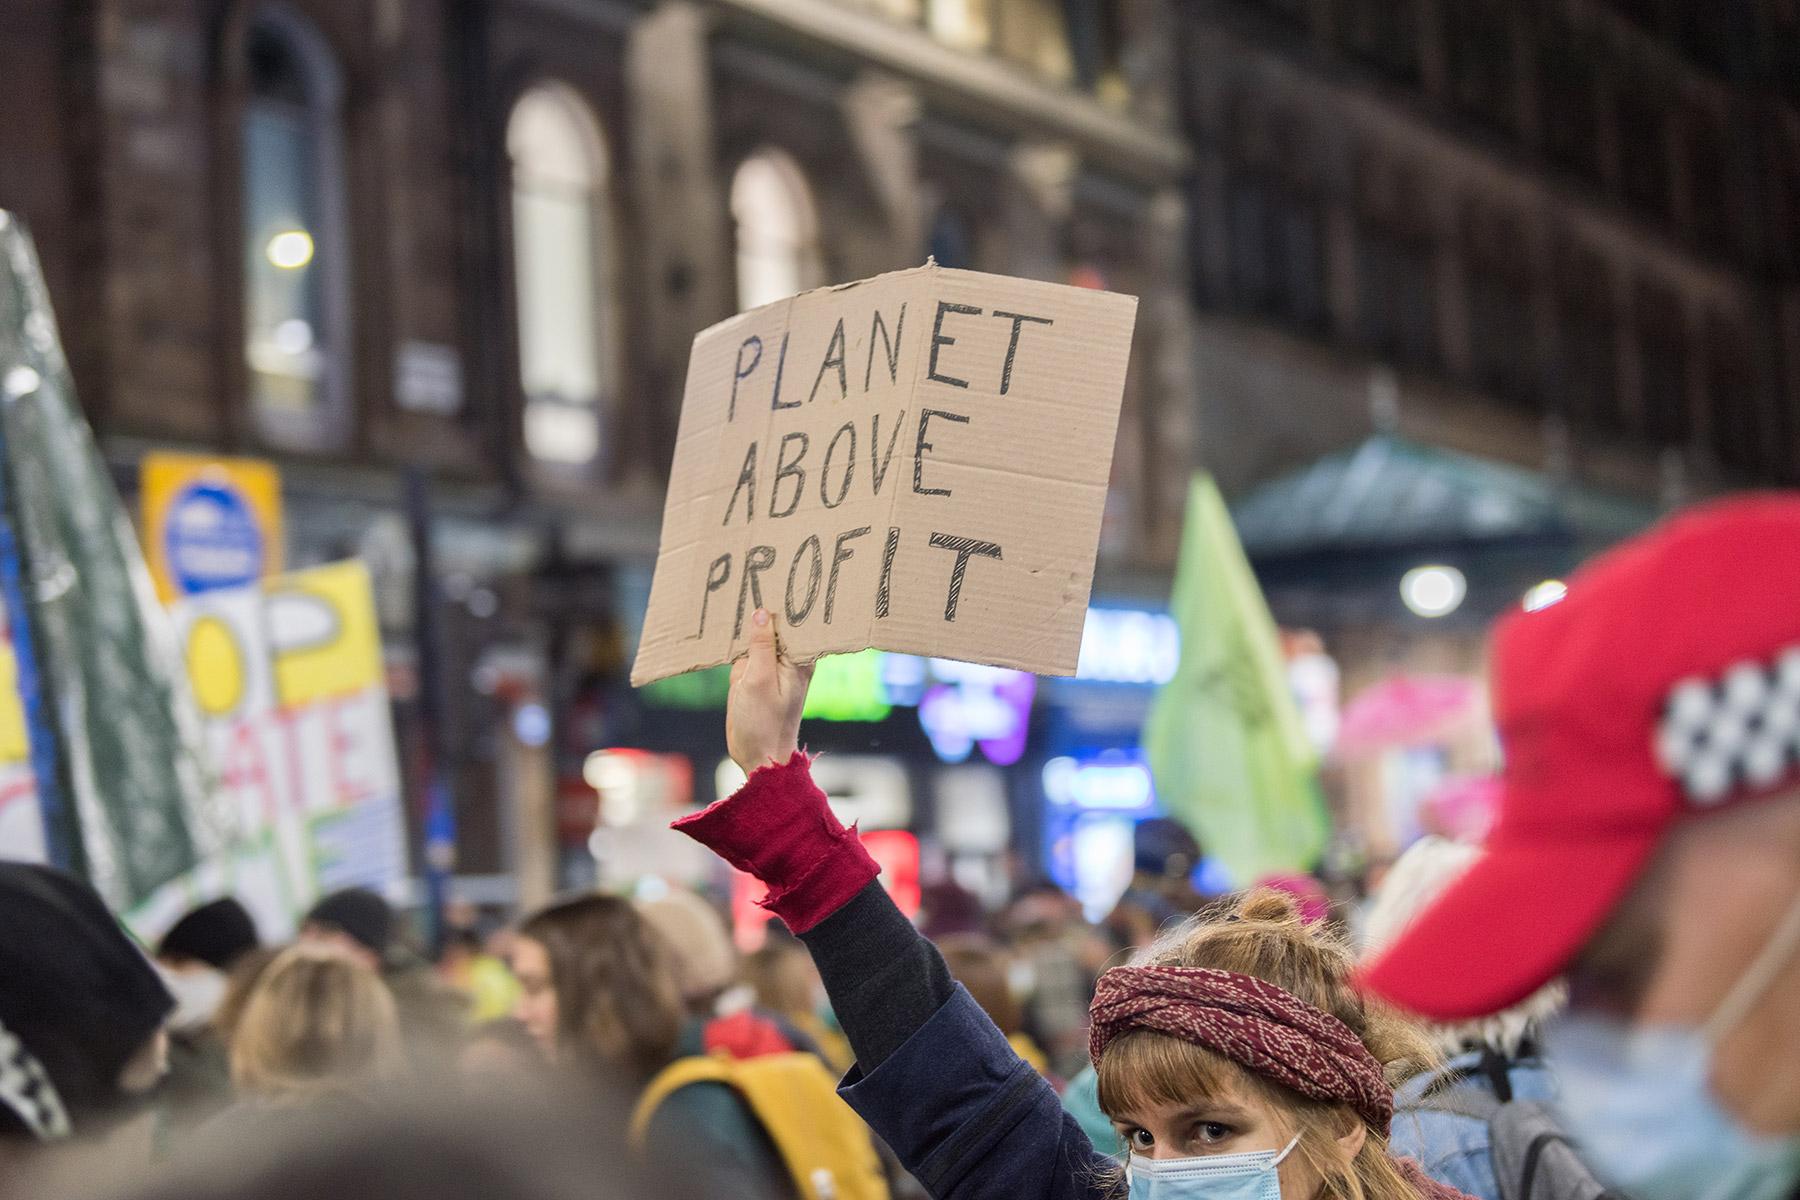 Climate activists in Glasgow during the COP26 conference in November 2021. Photo: LWF/A. Hillert